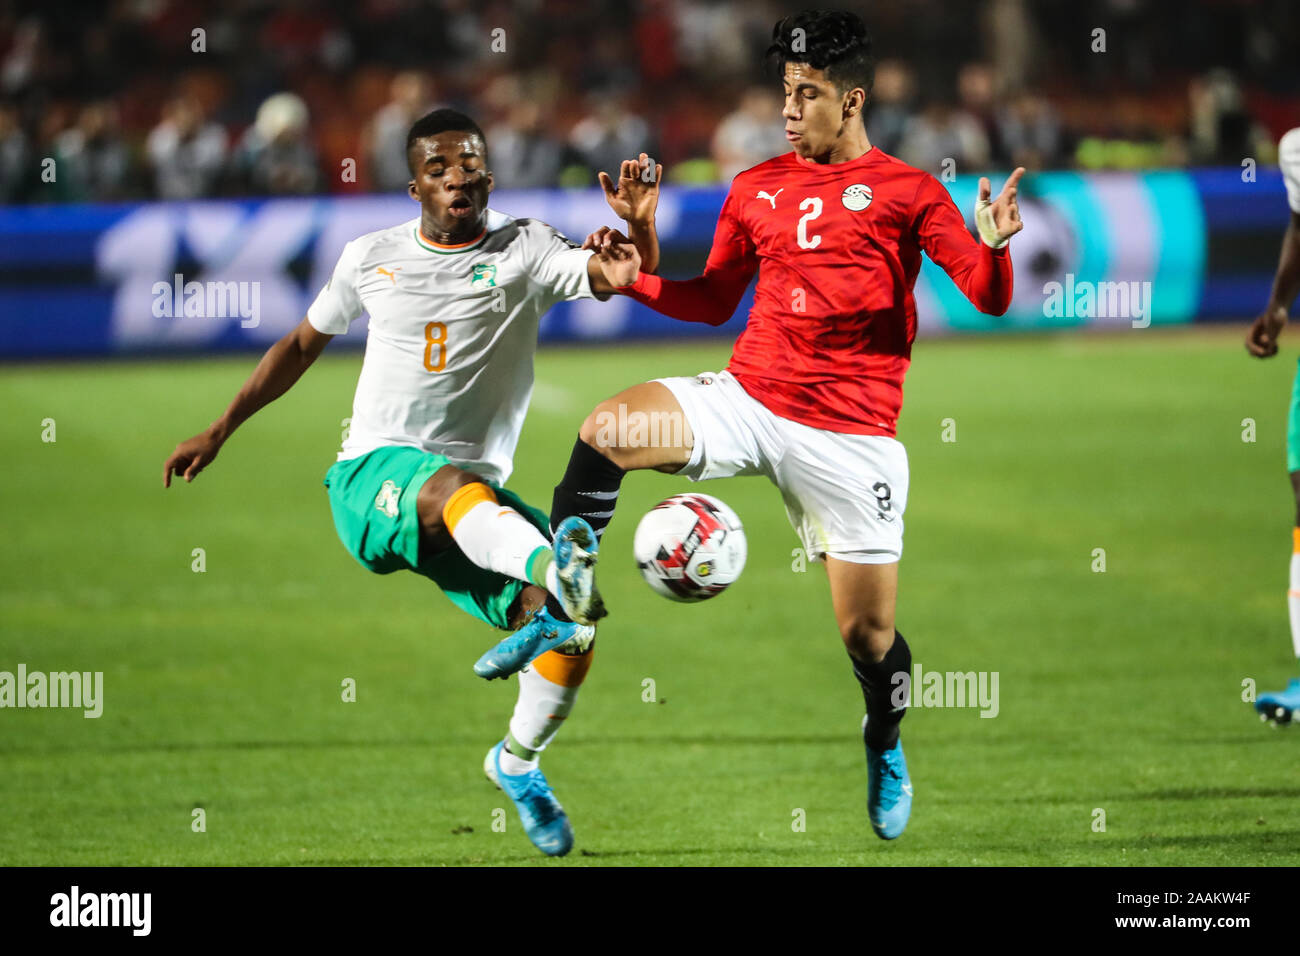 Cairo, Egypt. 22nd Nov, 2019. Egypt's Amar Hamdy (R) and Cote d'Ivoire's  Hamed Junior Traore battle for the ball during the Africa U-23 Cup of  Nations final soccer match between Egypt and